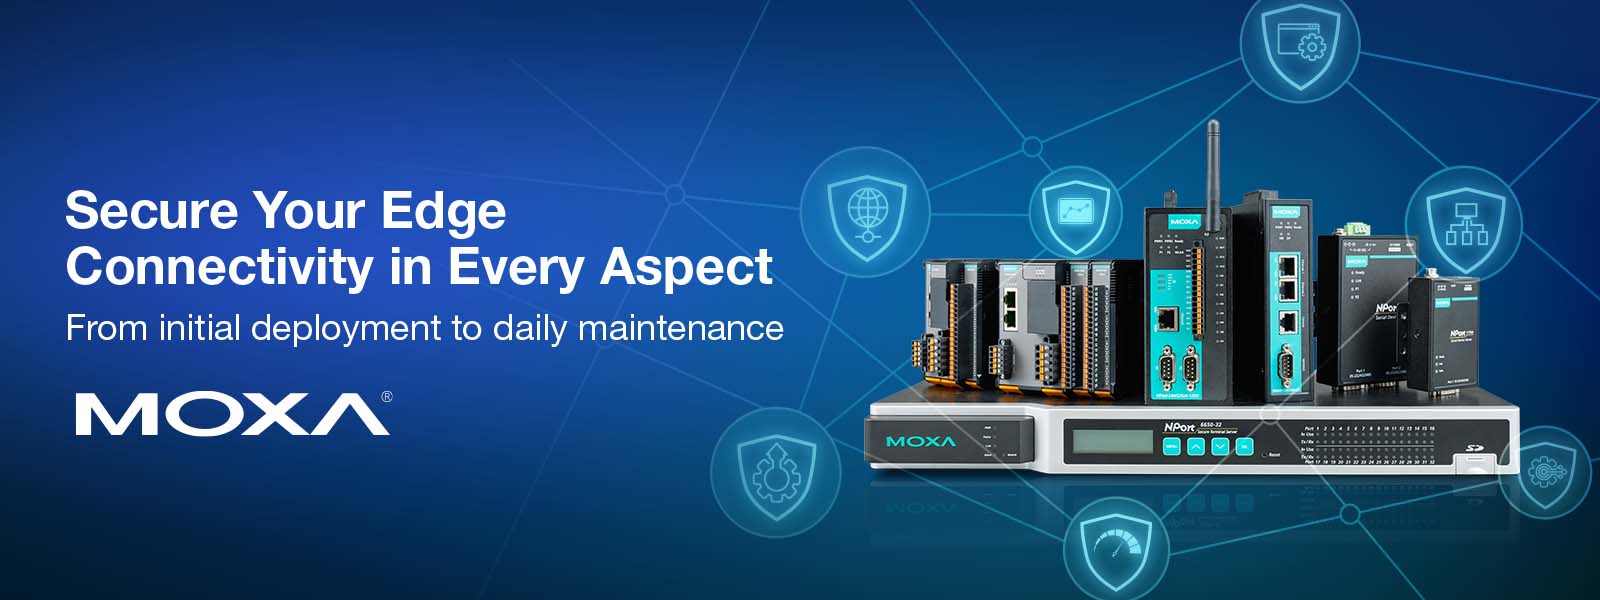 Secure Your Edge Connectivity with Moxa Banner